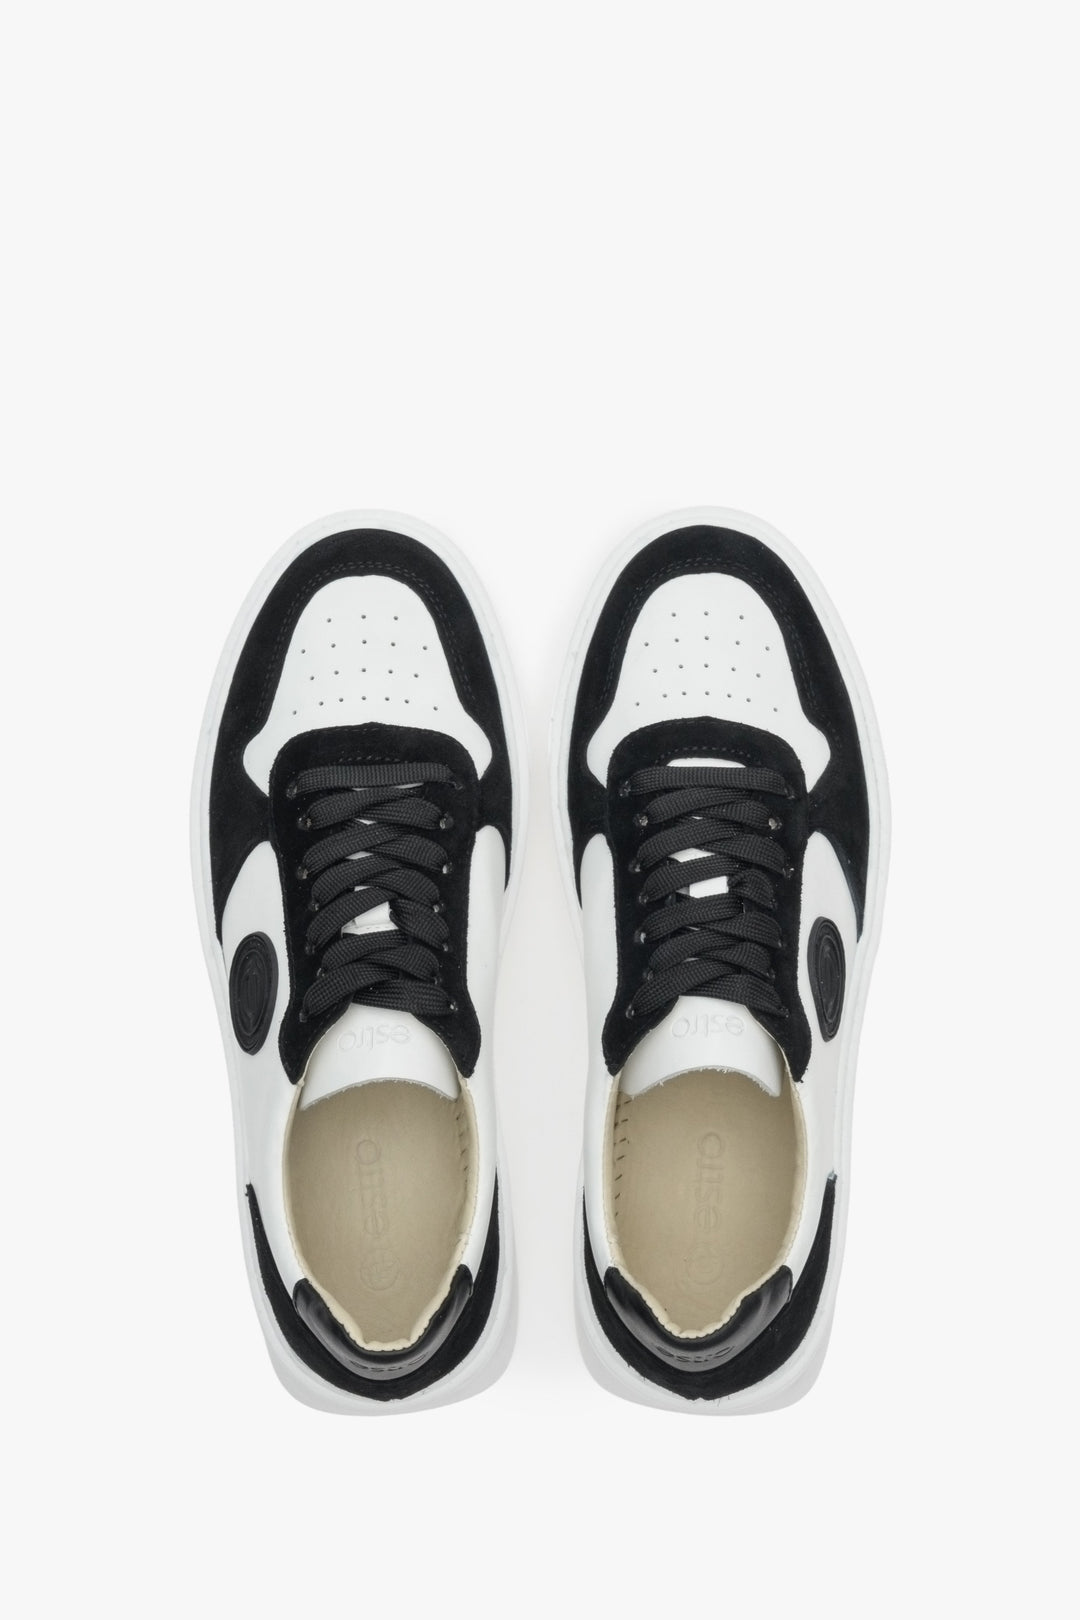 White and black women's sneakers for spring and autumn Estro - footwear presentation from above.